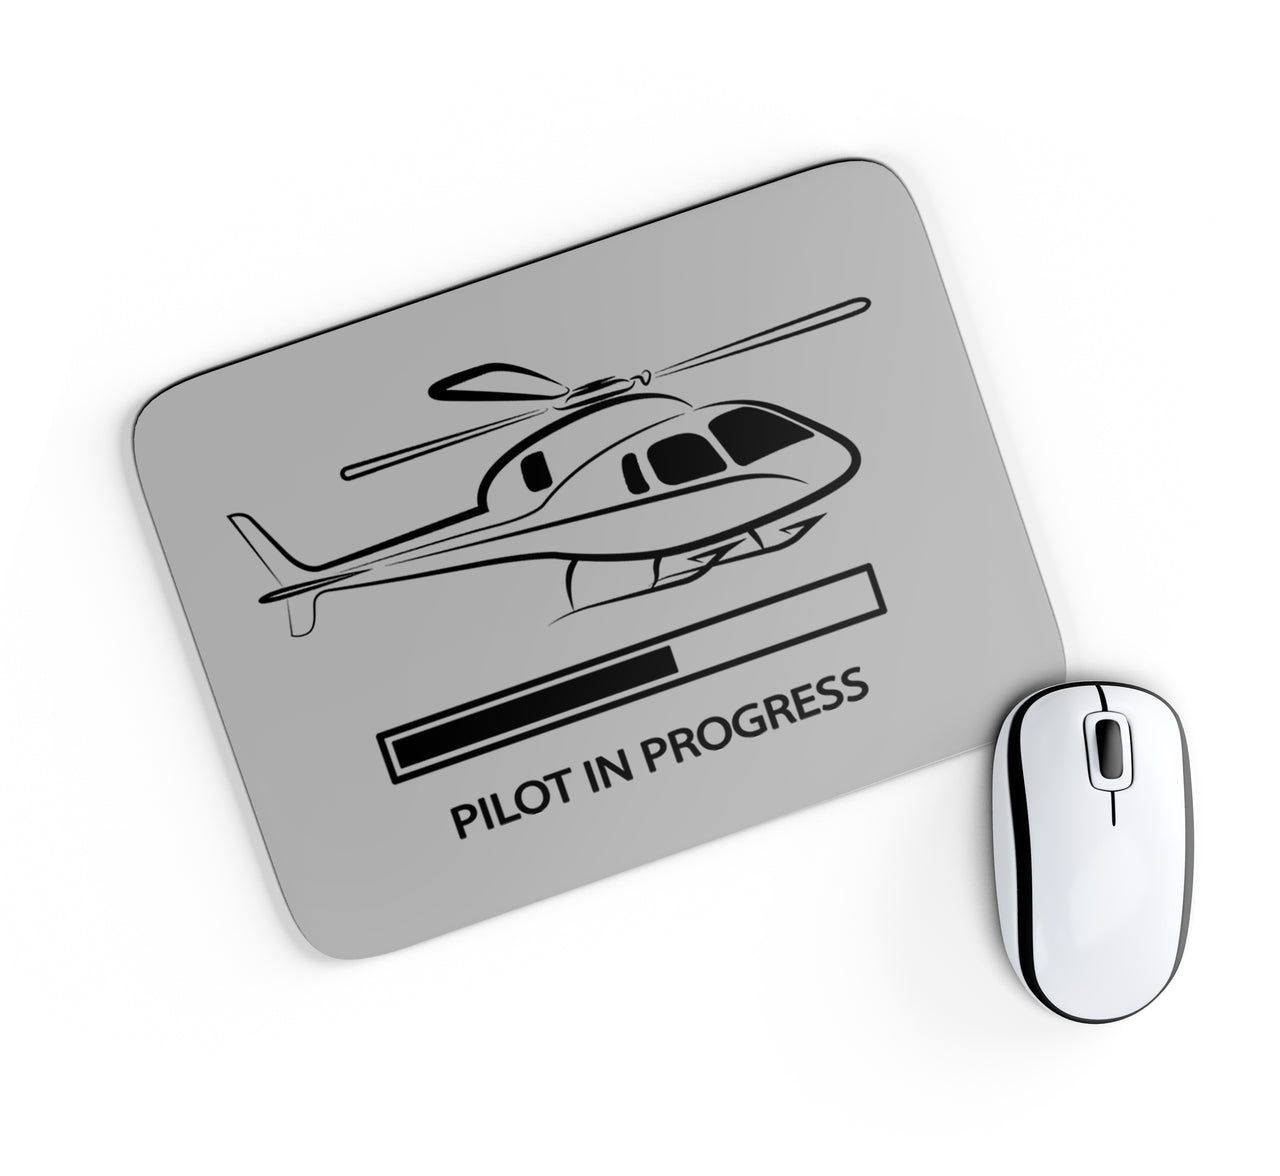 Pilot In Progress (Helicopter) Designed Mouse Pads